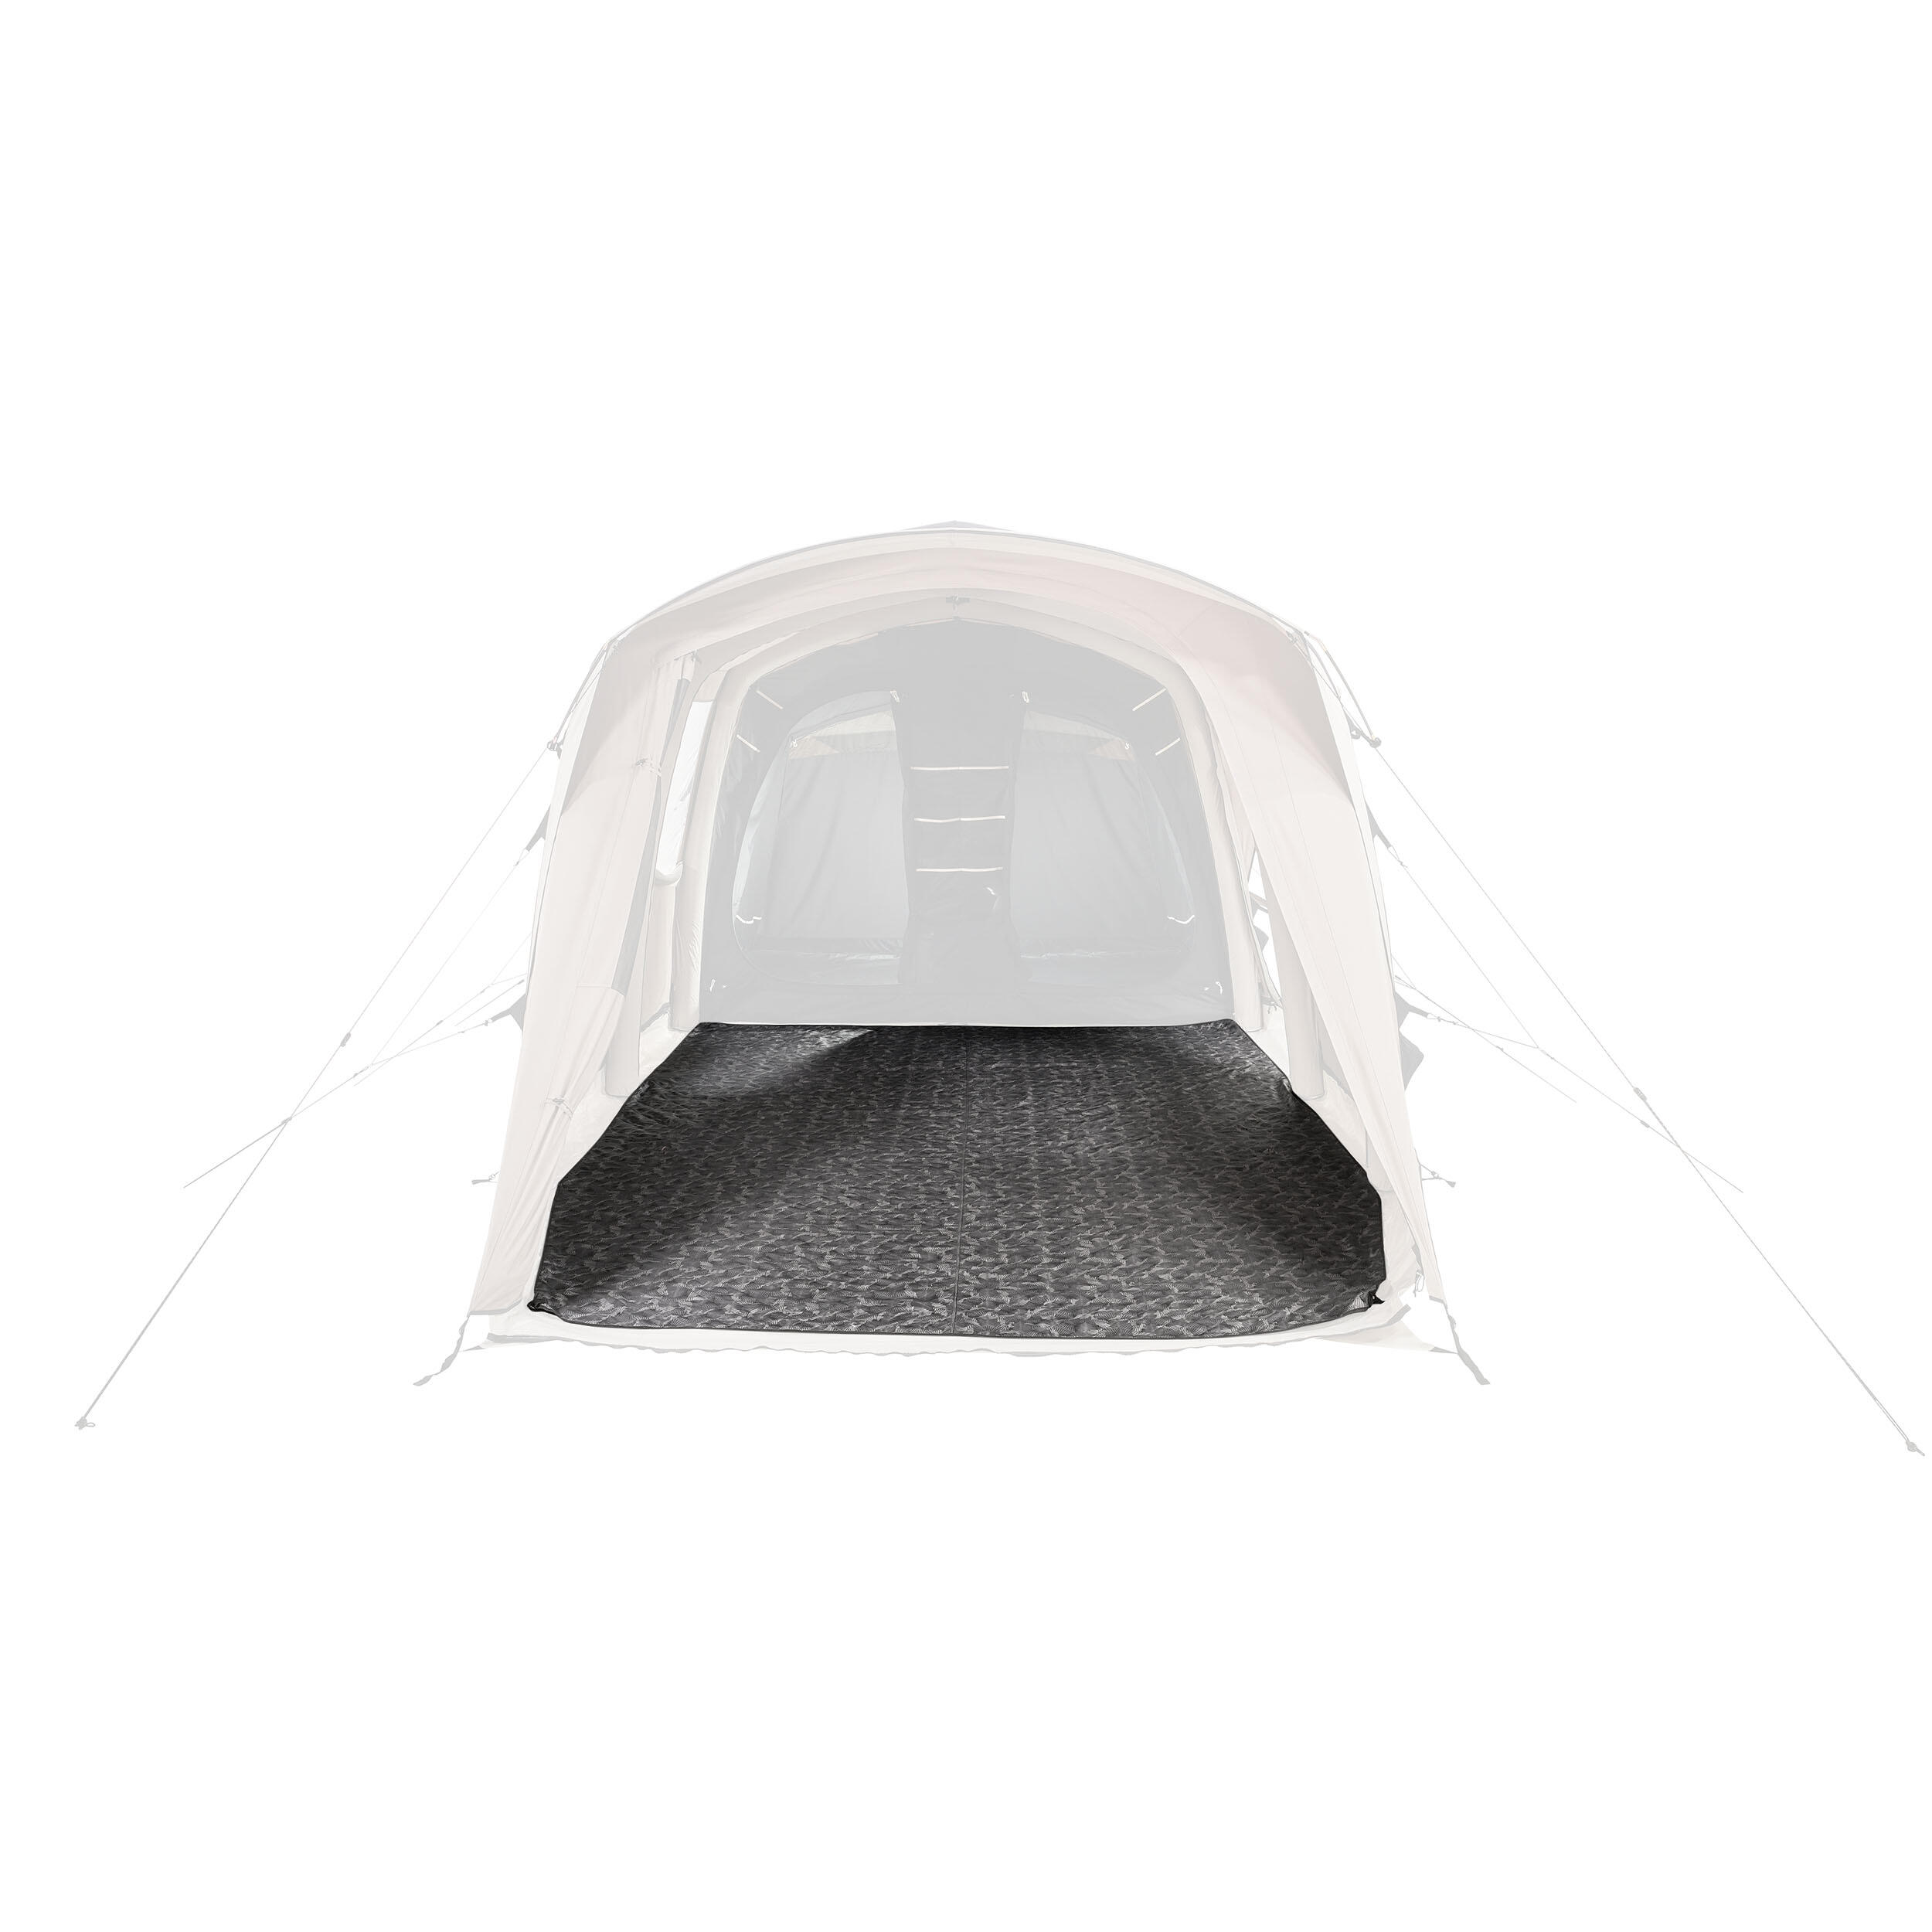 COMFORTABLE INSULATING BLANKET-SPARE PART FOR THE AIRSECONDS6.3 POLY-COTTON TENT 1/11